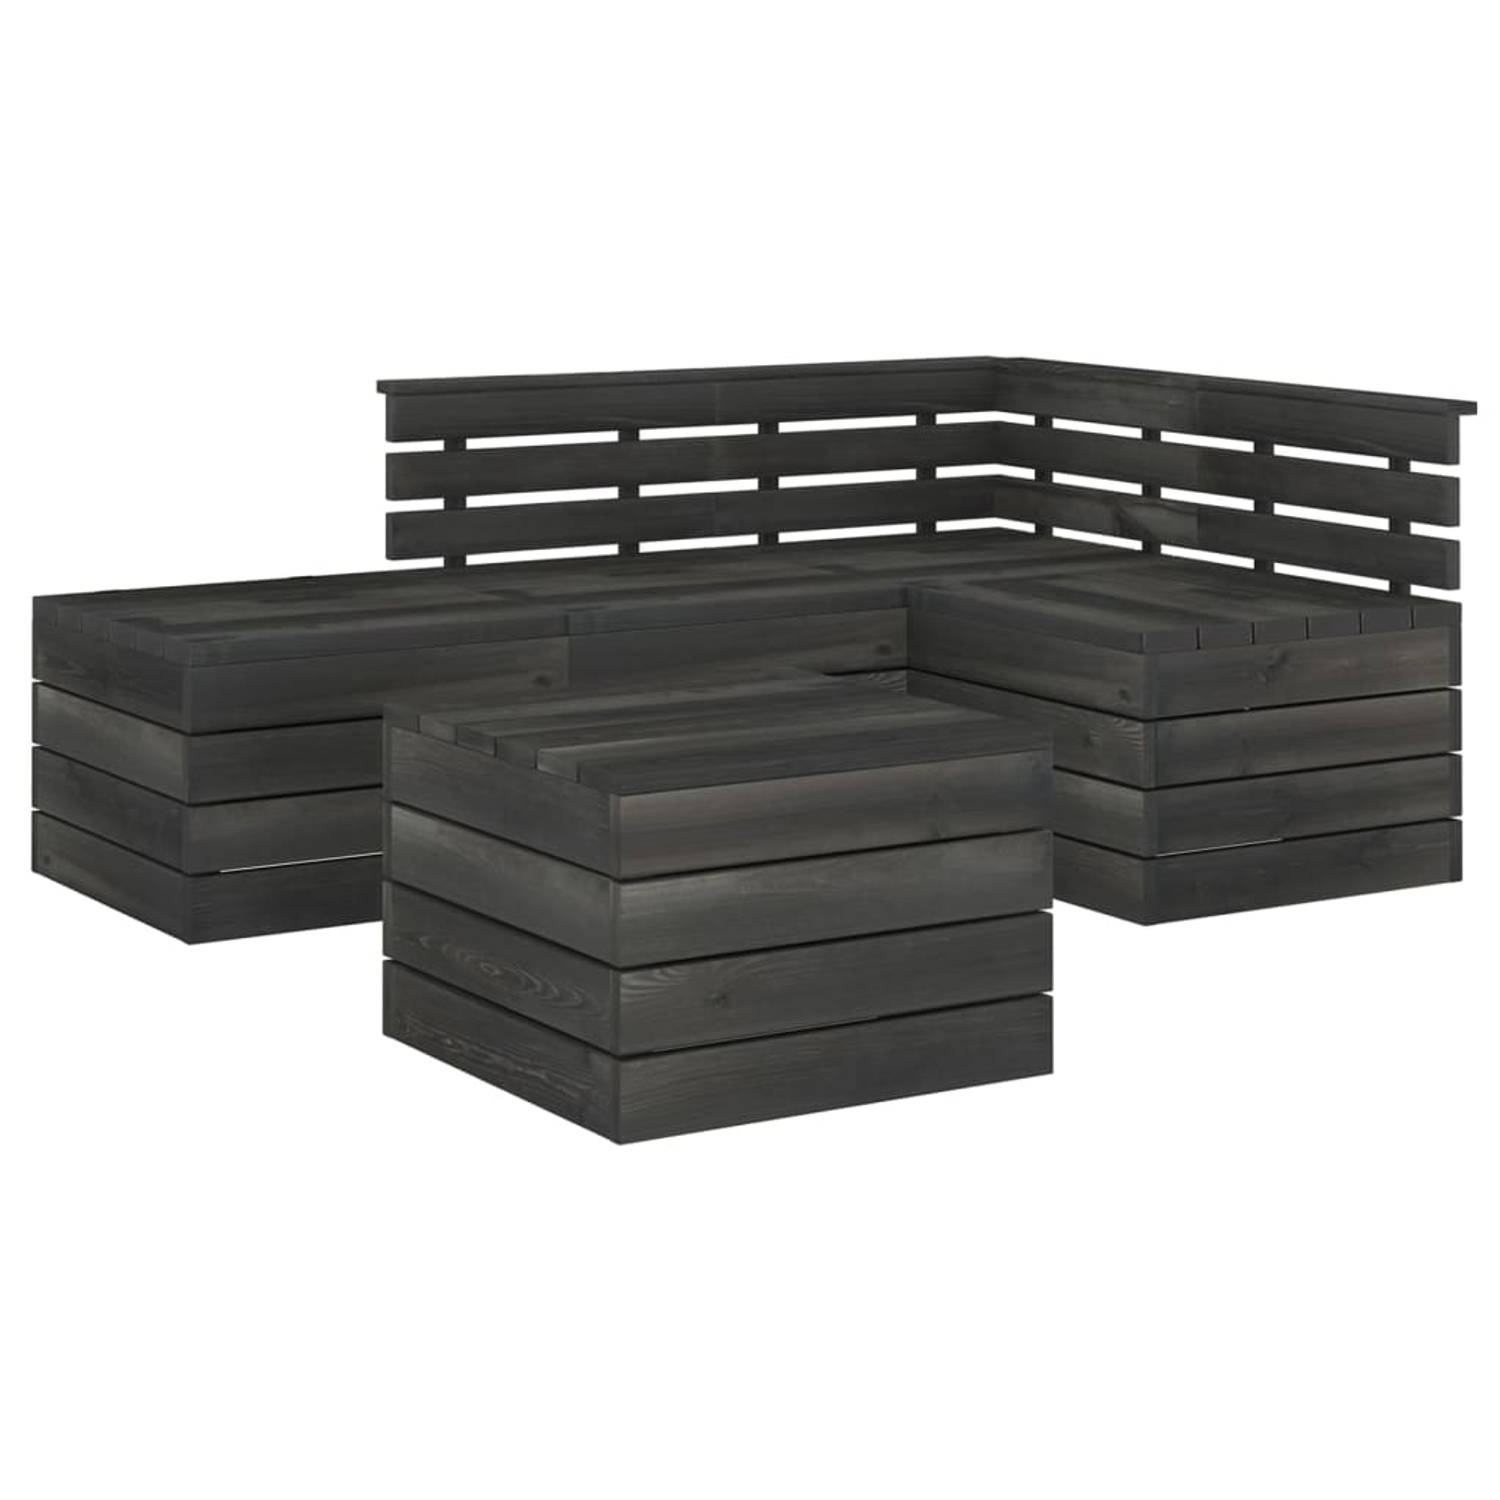 The Living Store 5-delige Loungeset pallet massief grenenhout donkergrijs - Tuinset